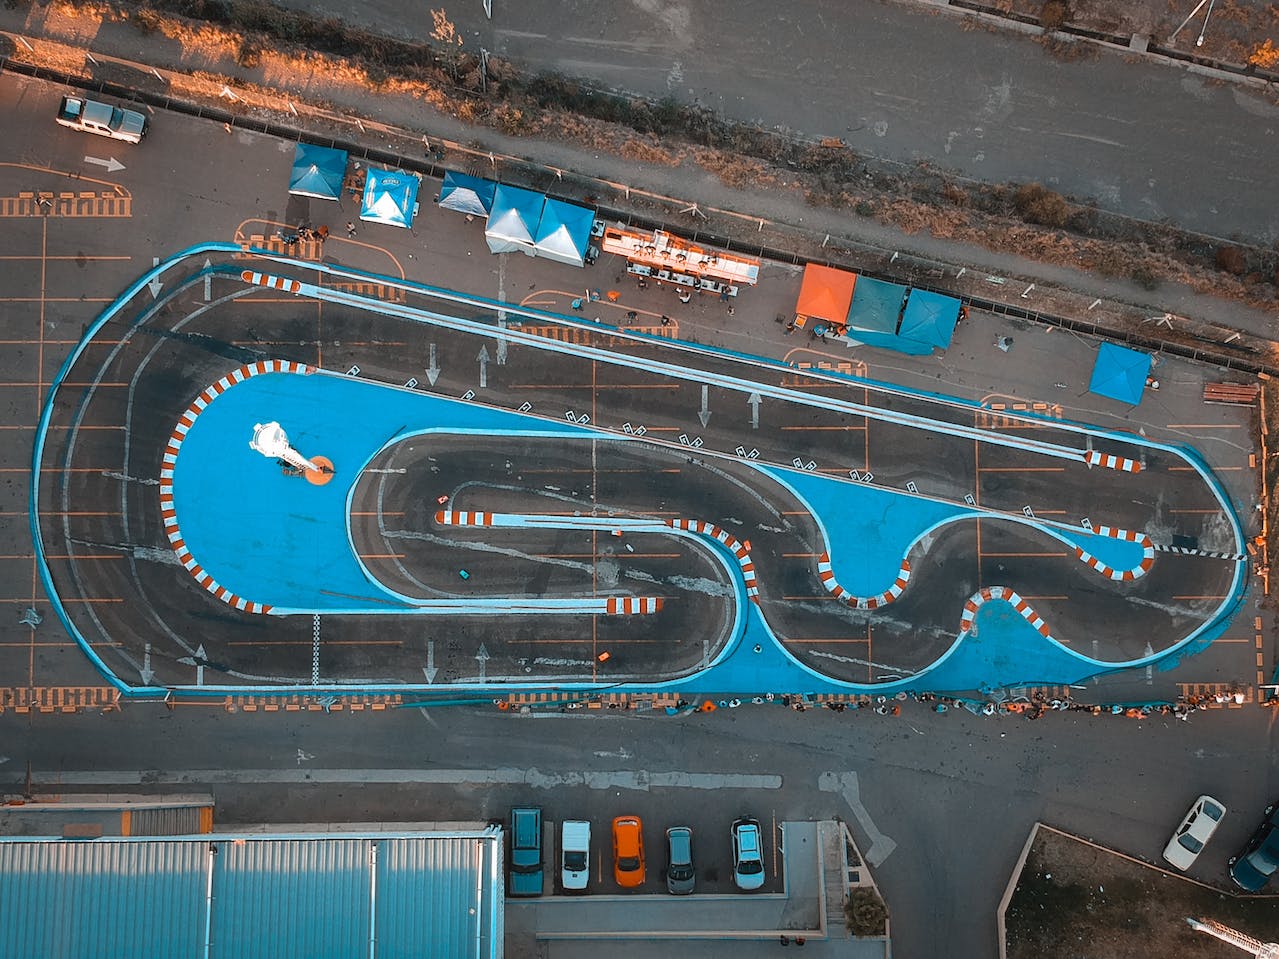 an aerial view of a race track